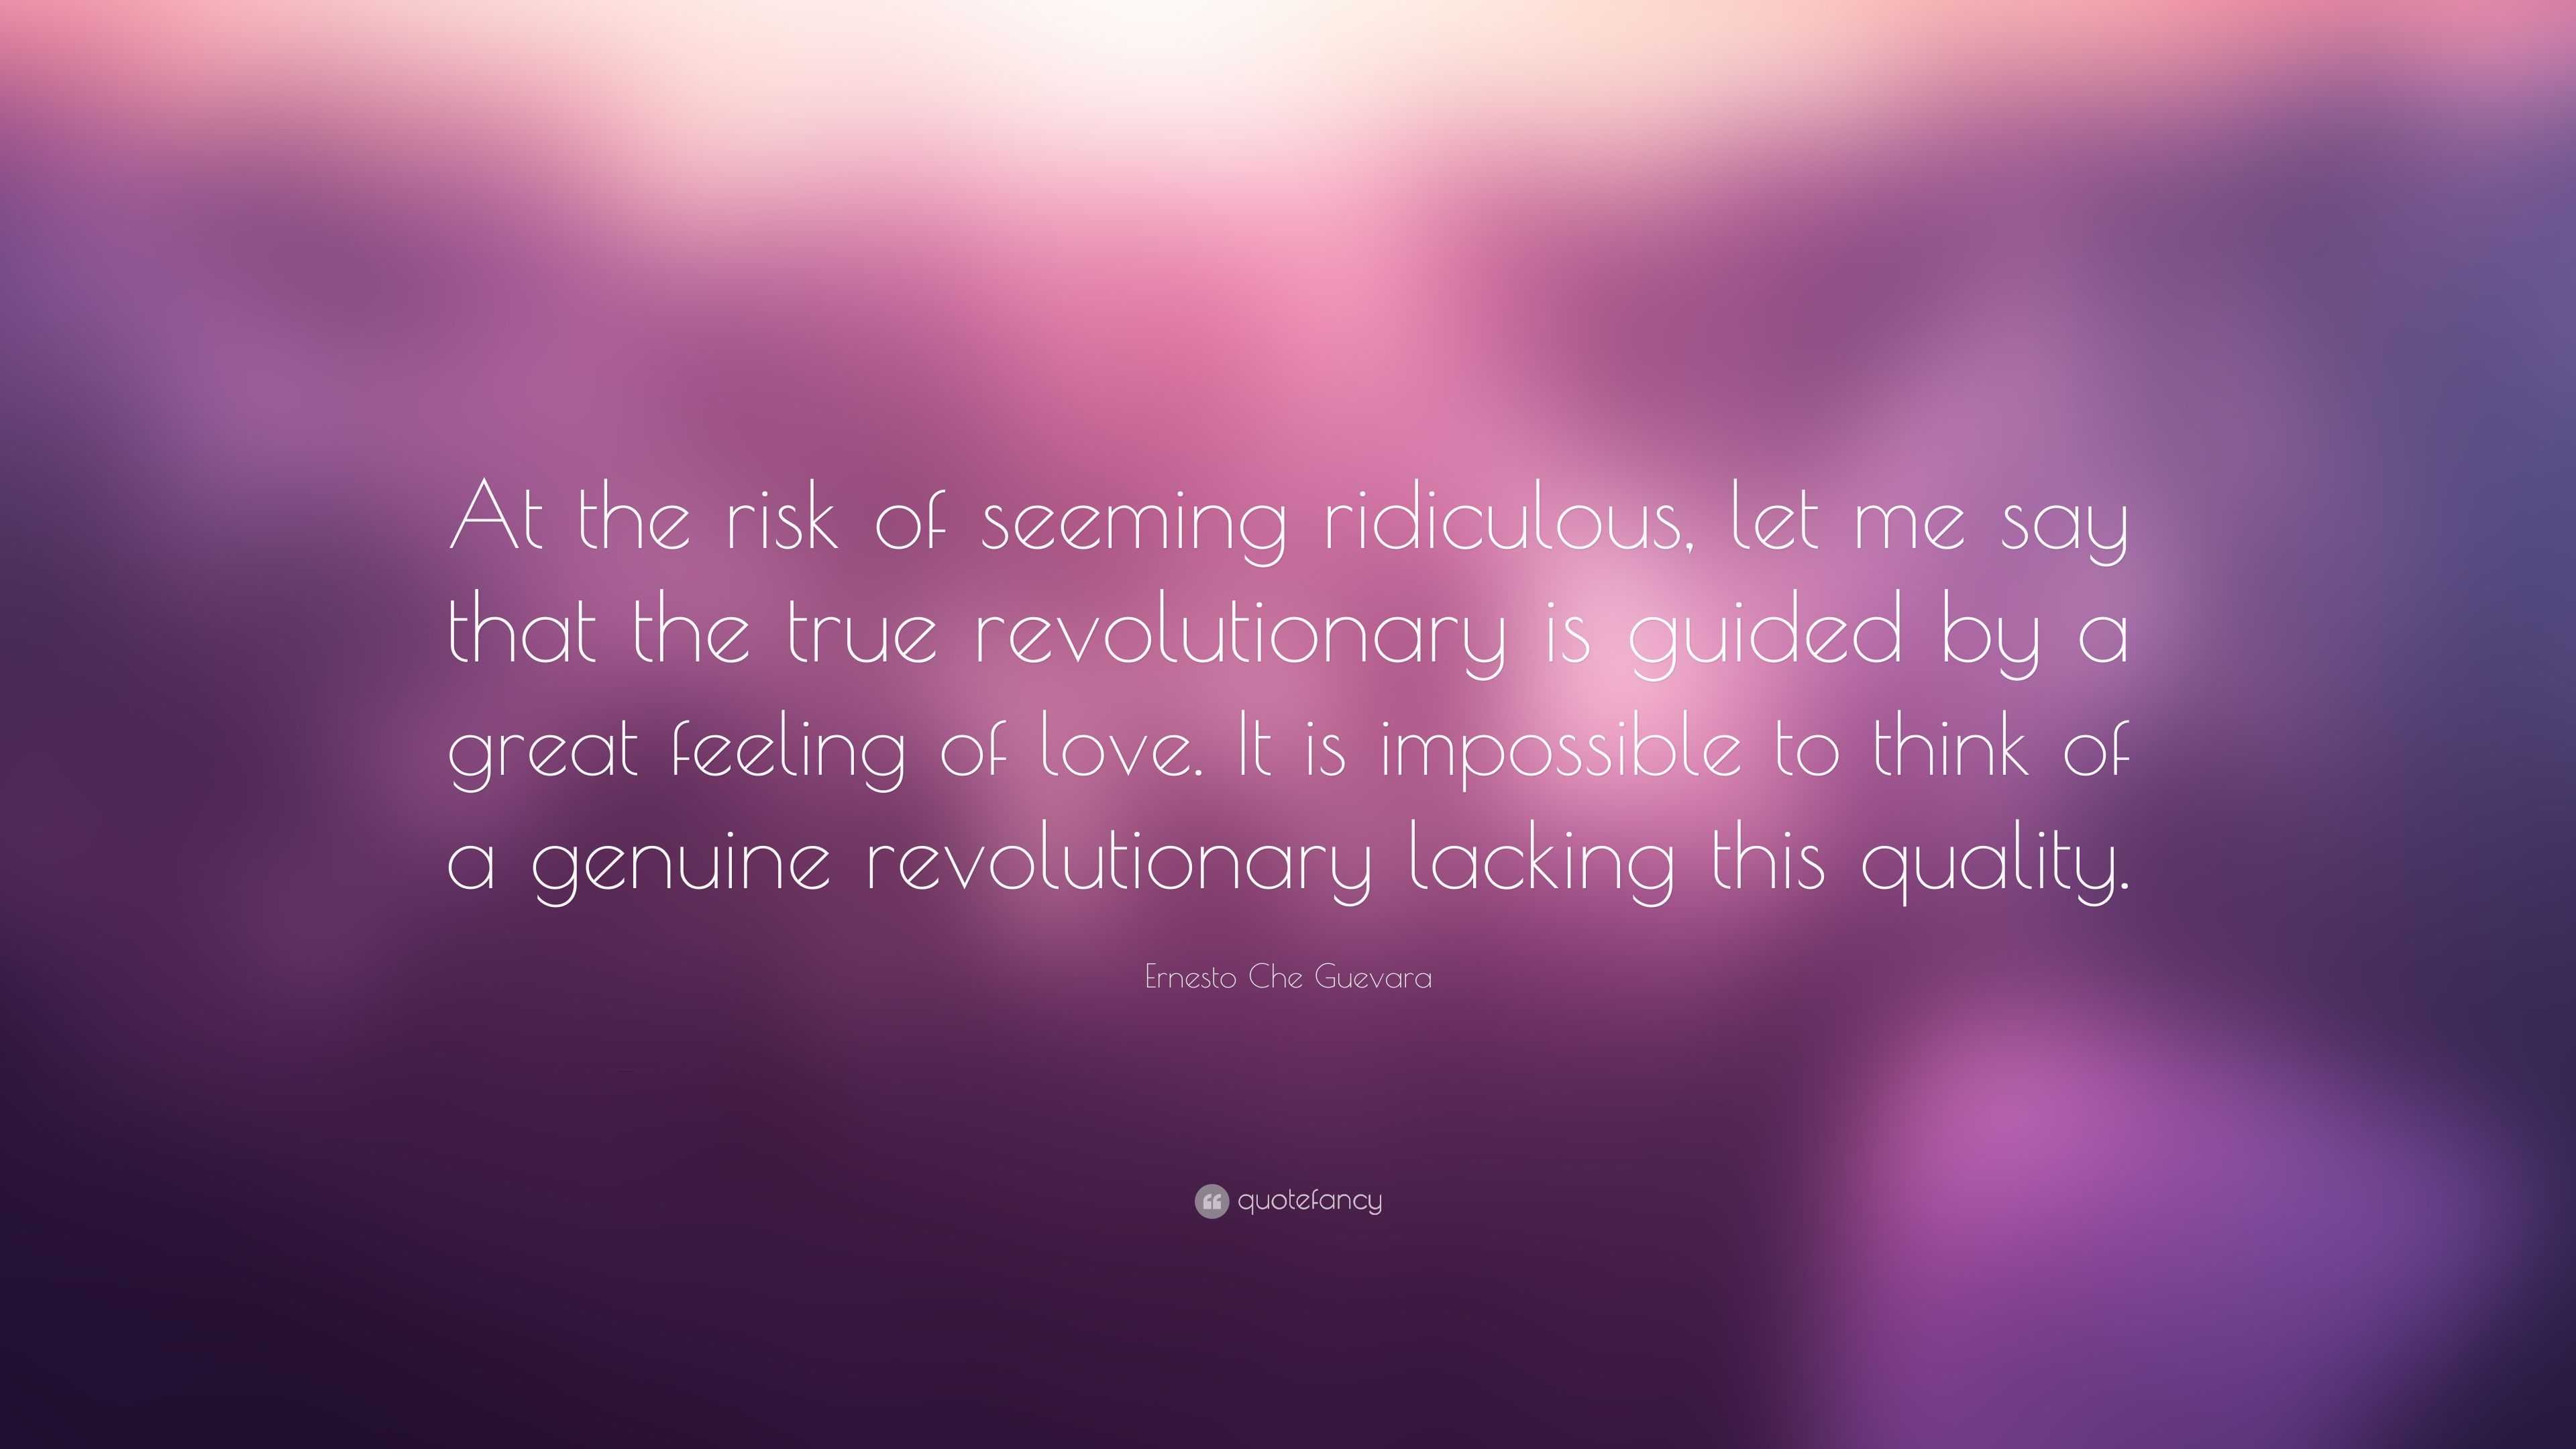 Ernesto Che Guevara Quote: “At the risk of seeming ridiculous, let me ...